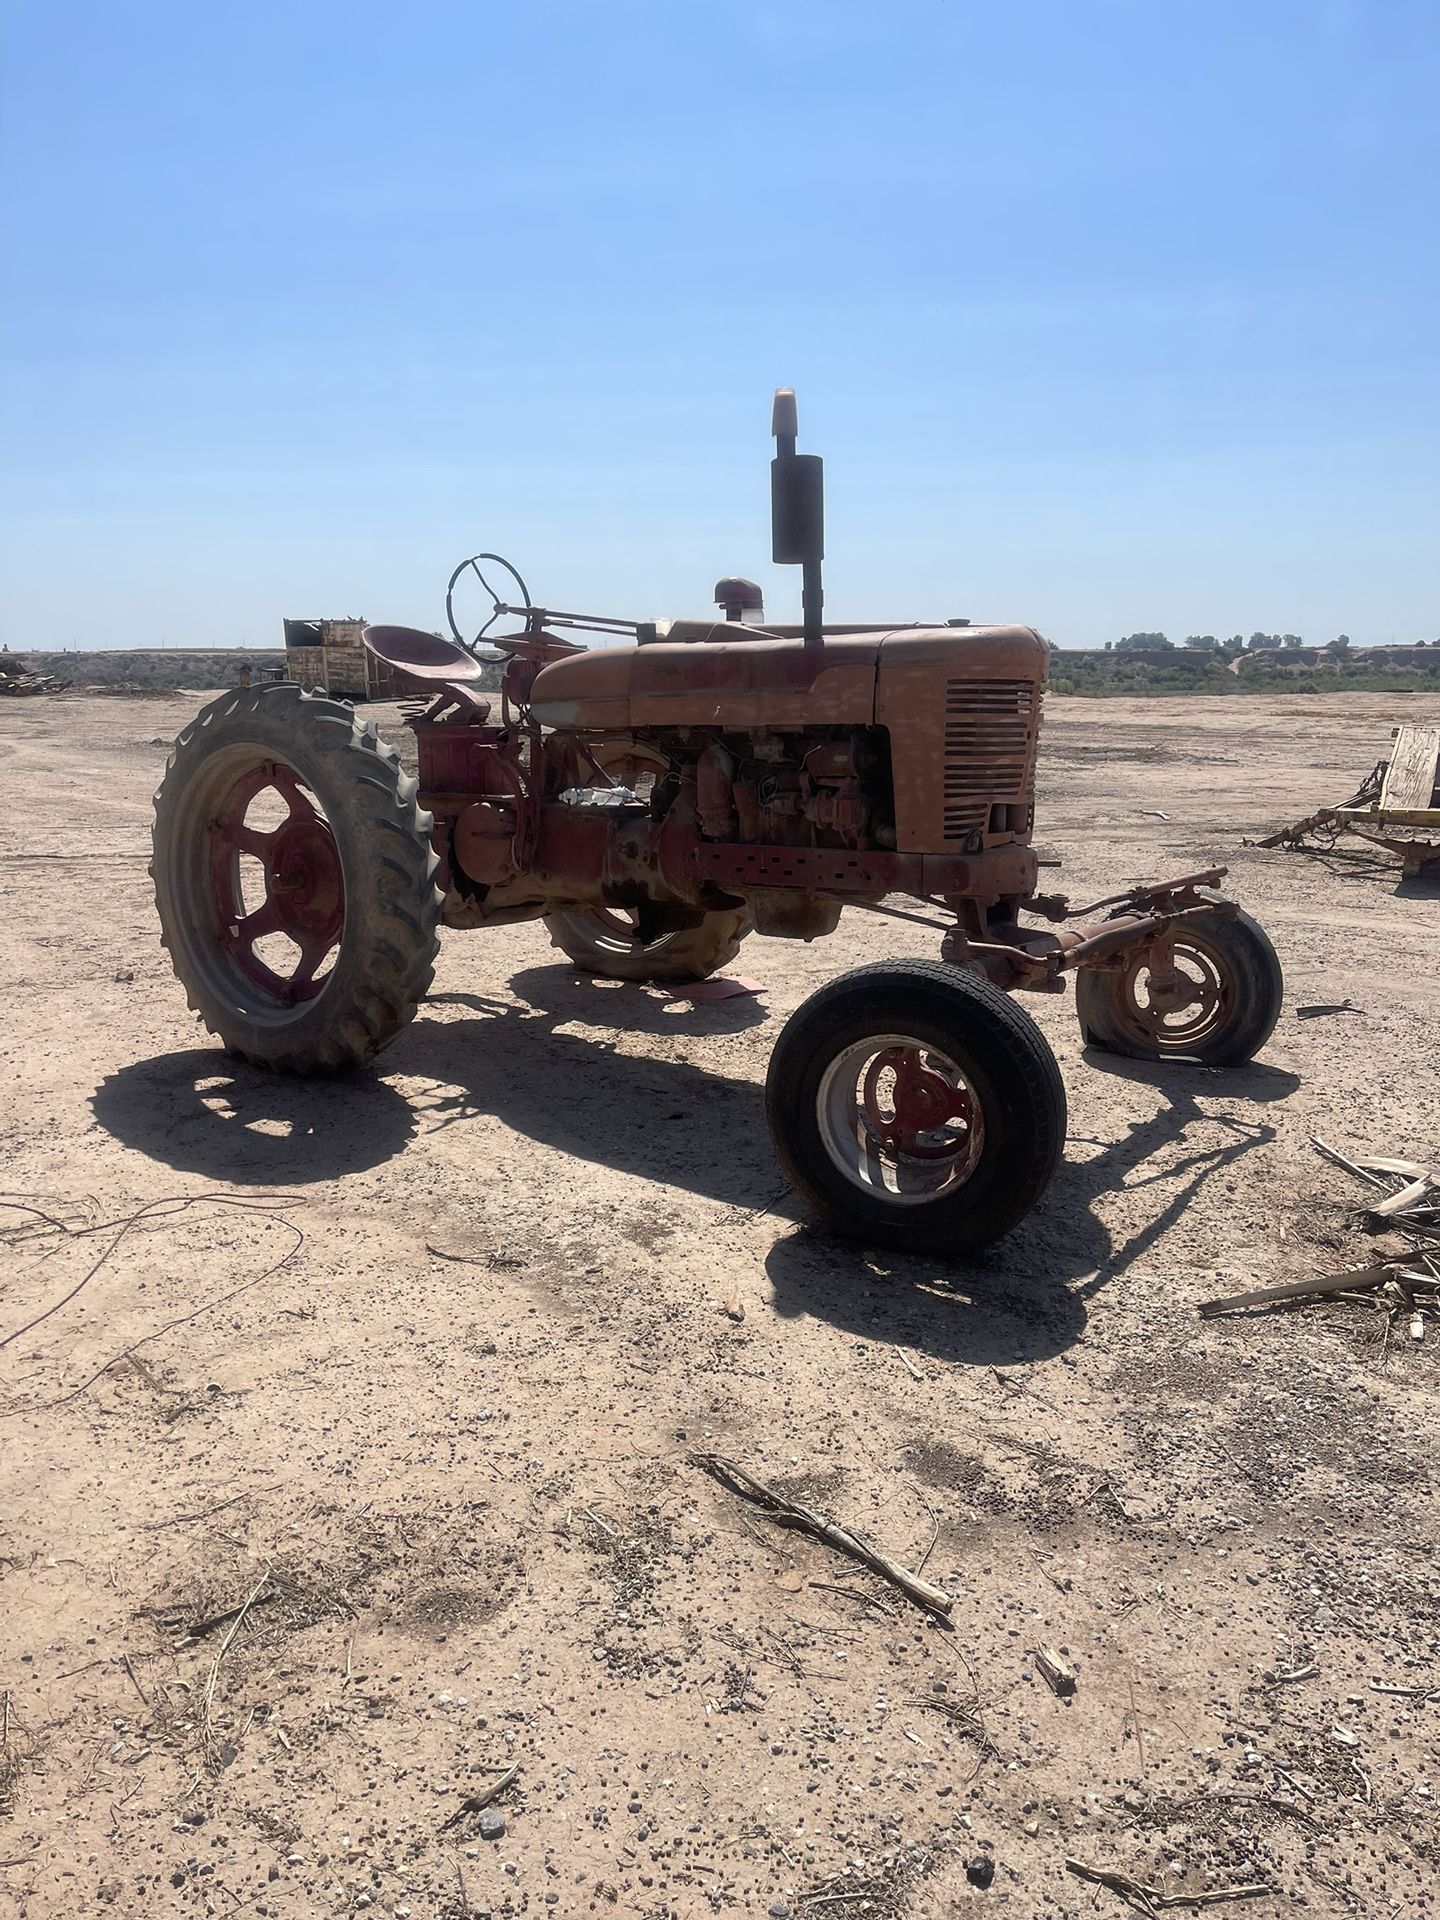 Vintage - Diesel Tractor (With Trailer And Attachments)